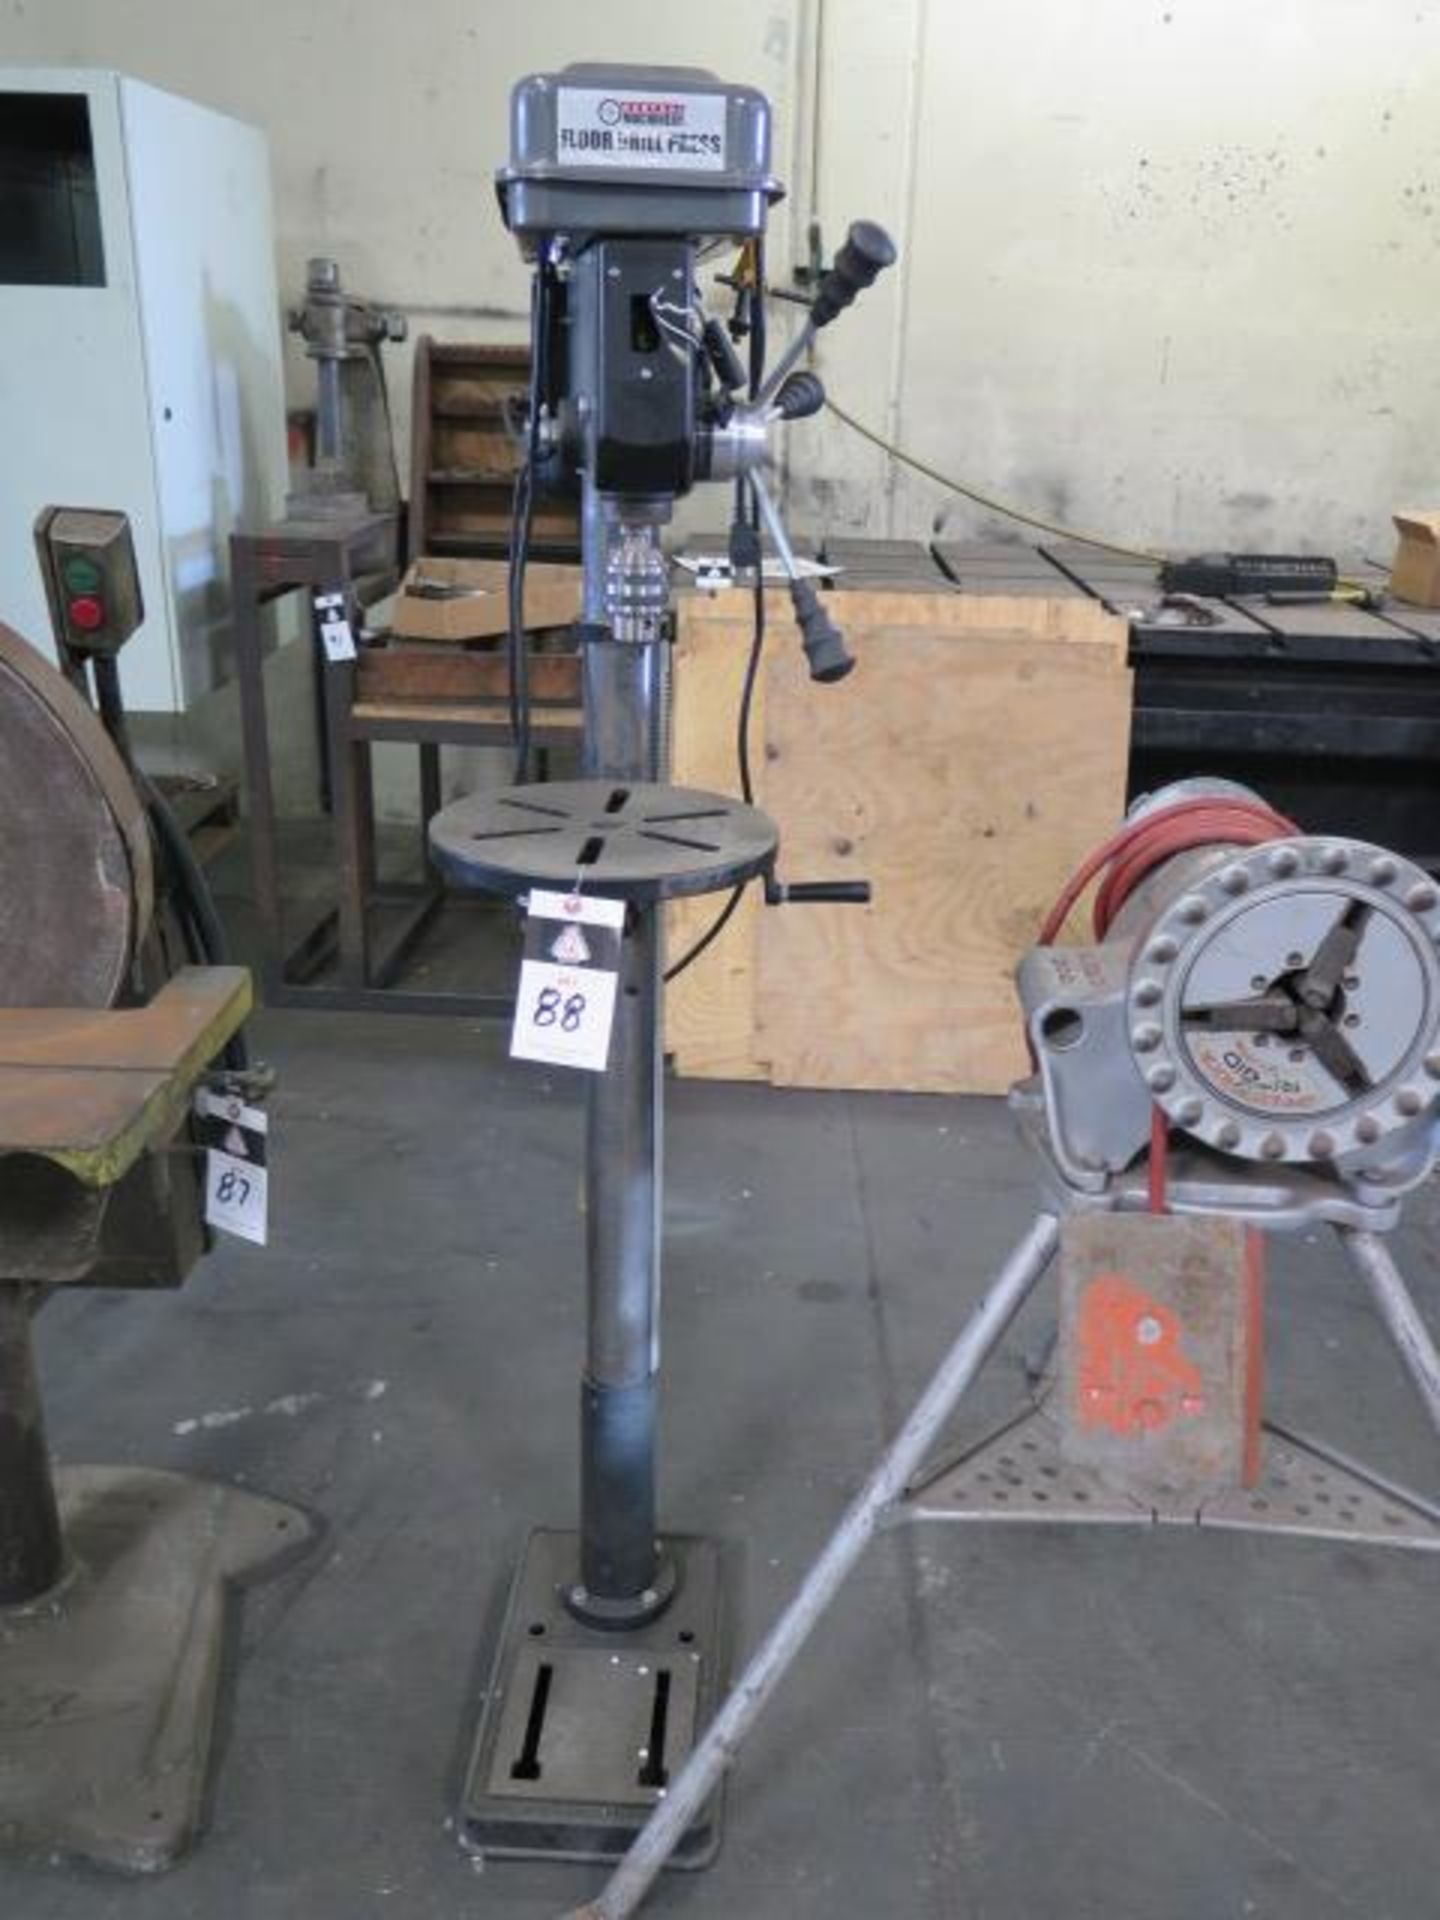 Central Machinery Pedestal Drill Press (SOLD AS-IS - NO WARRANTY)